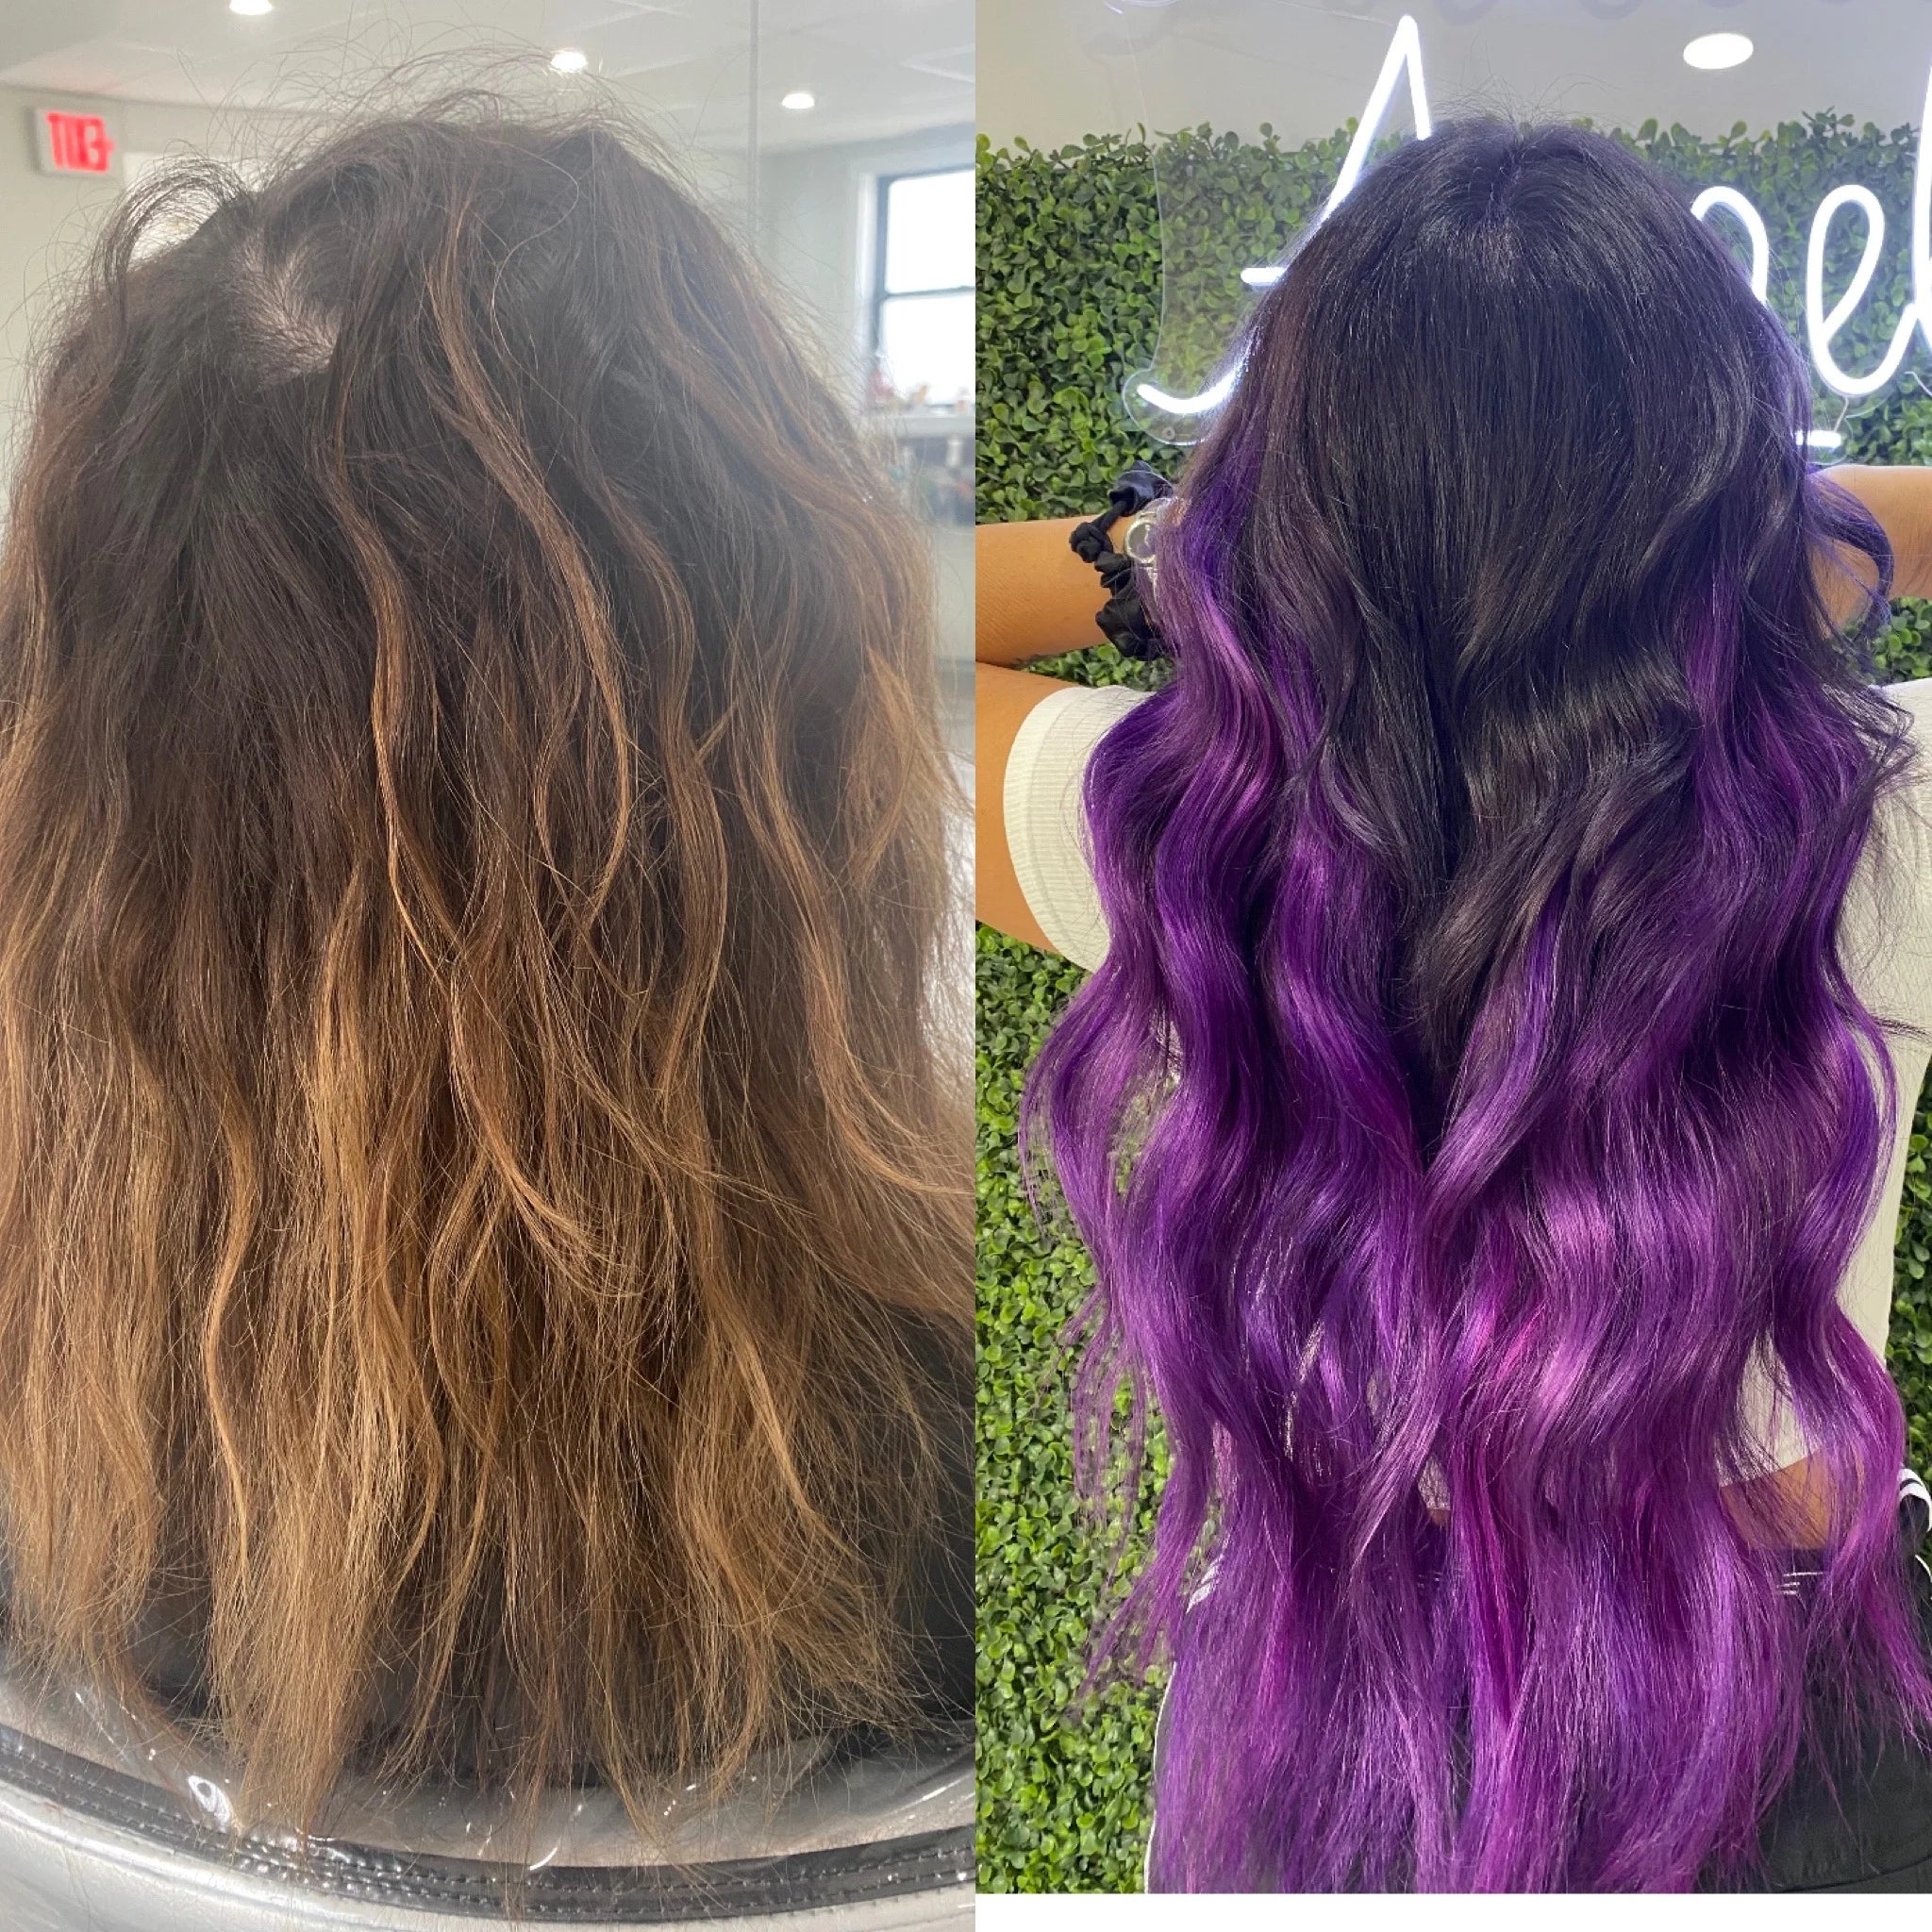 Can Hair Extensions Be Dyed Purple?